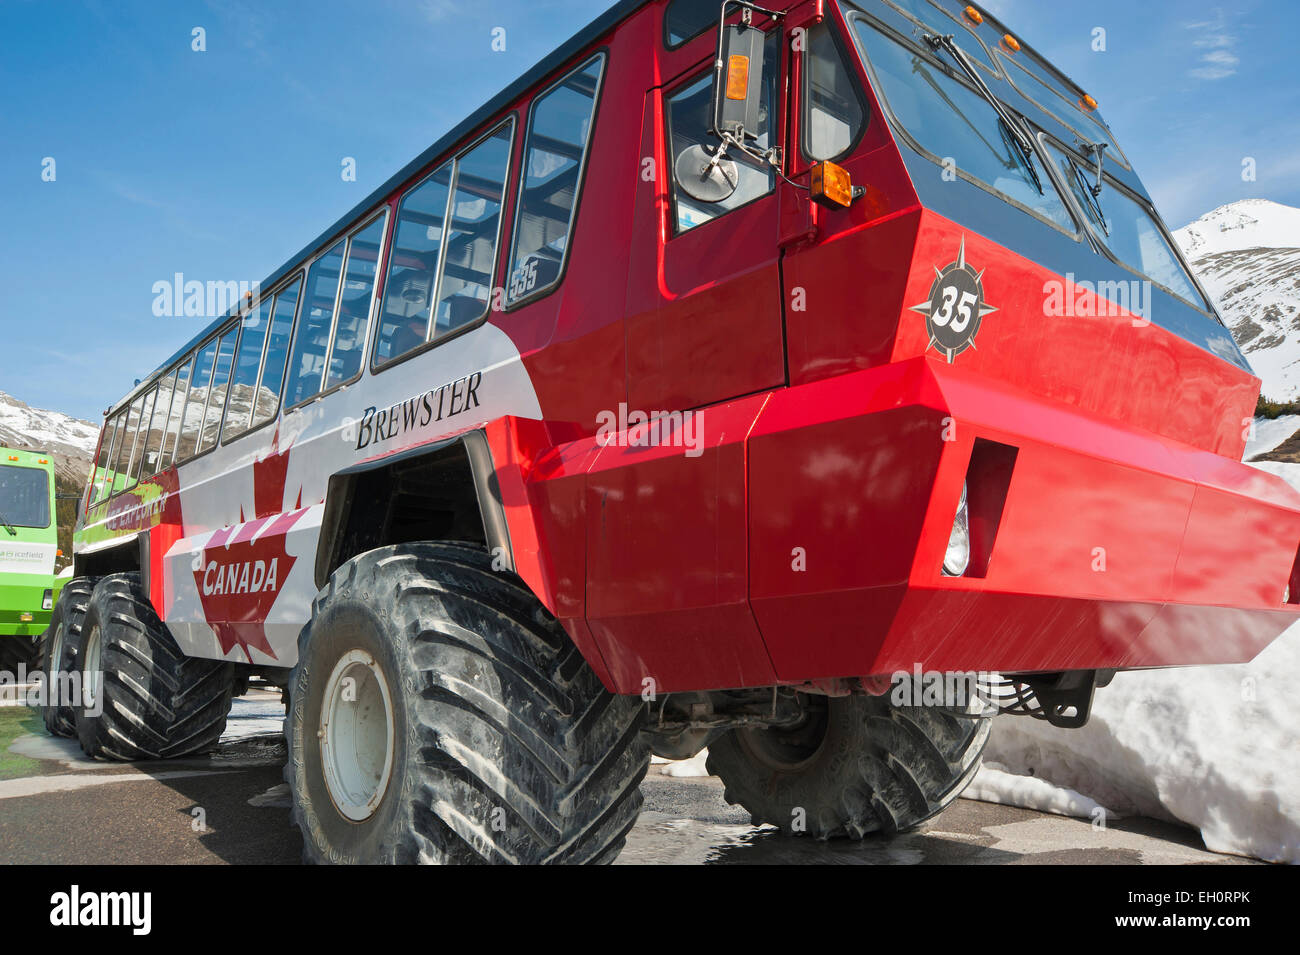 Jasper National Park, Canada - May 13, 2012: Snowcoach at the Icefield Center at the Athabasca Glacier, Jasper National Park Stock Photo